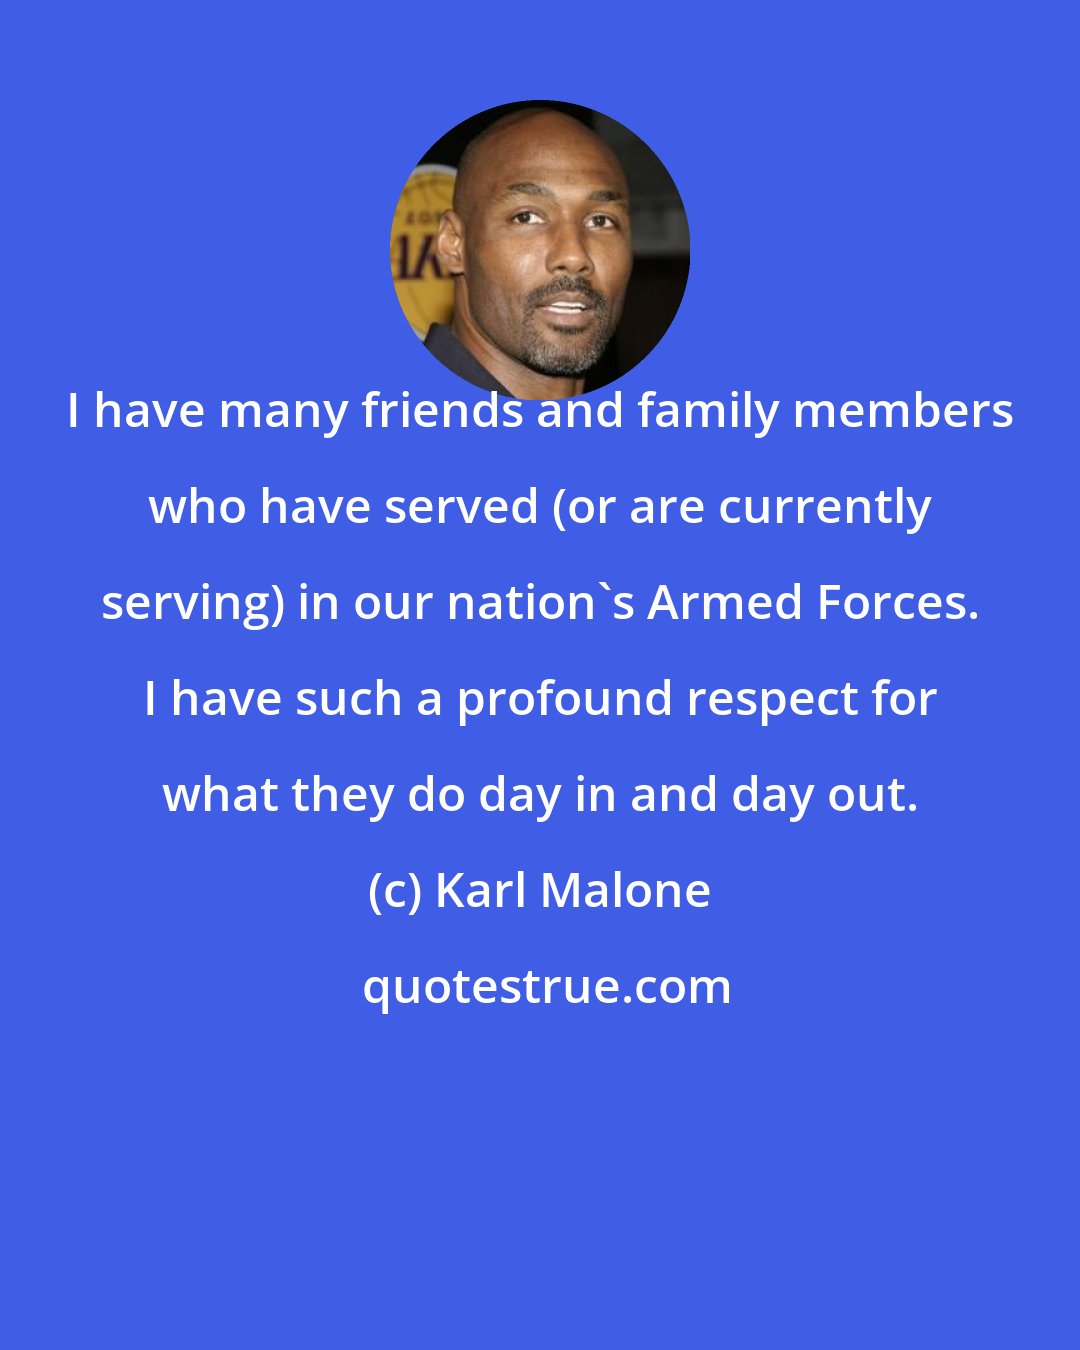 Karl Malone: I have many friends and family members who have served (or are currently serving) in our nation's Armed Forces. I have such a profound respect for what they do day in and day out.